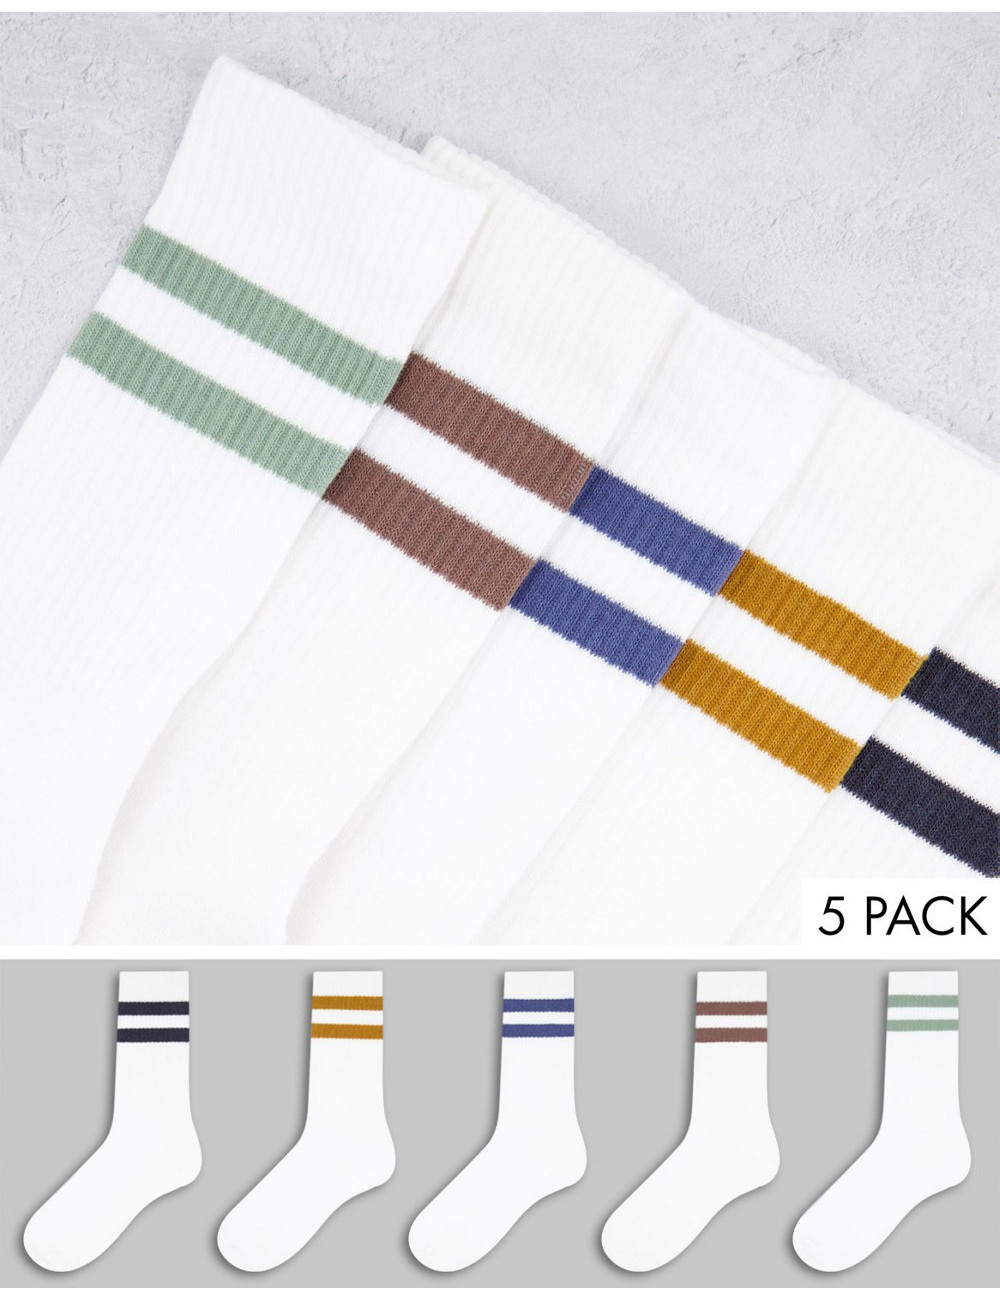 New Look 5 pack socks with...